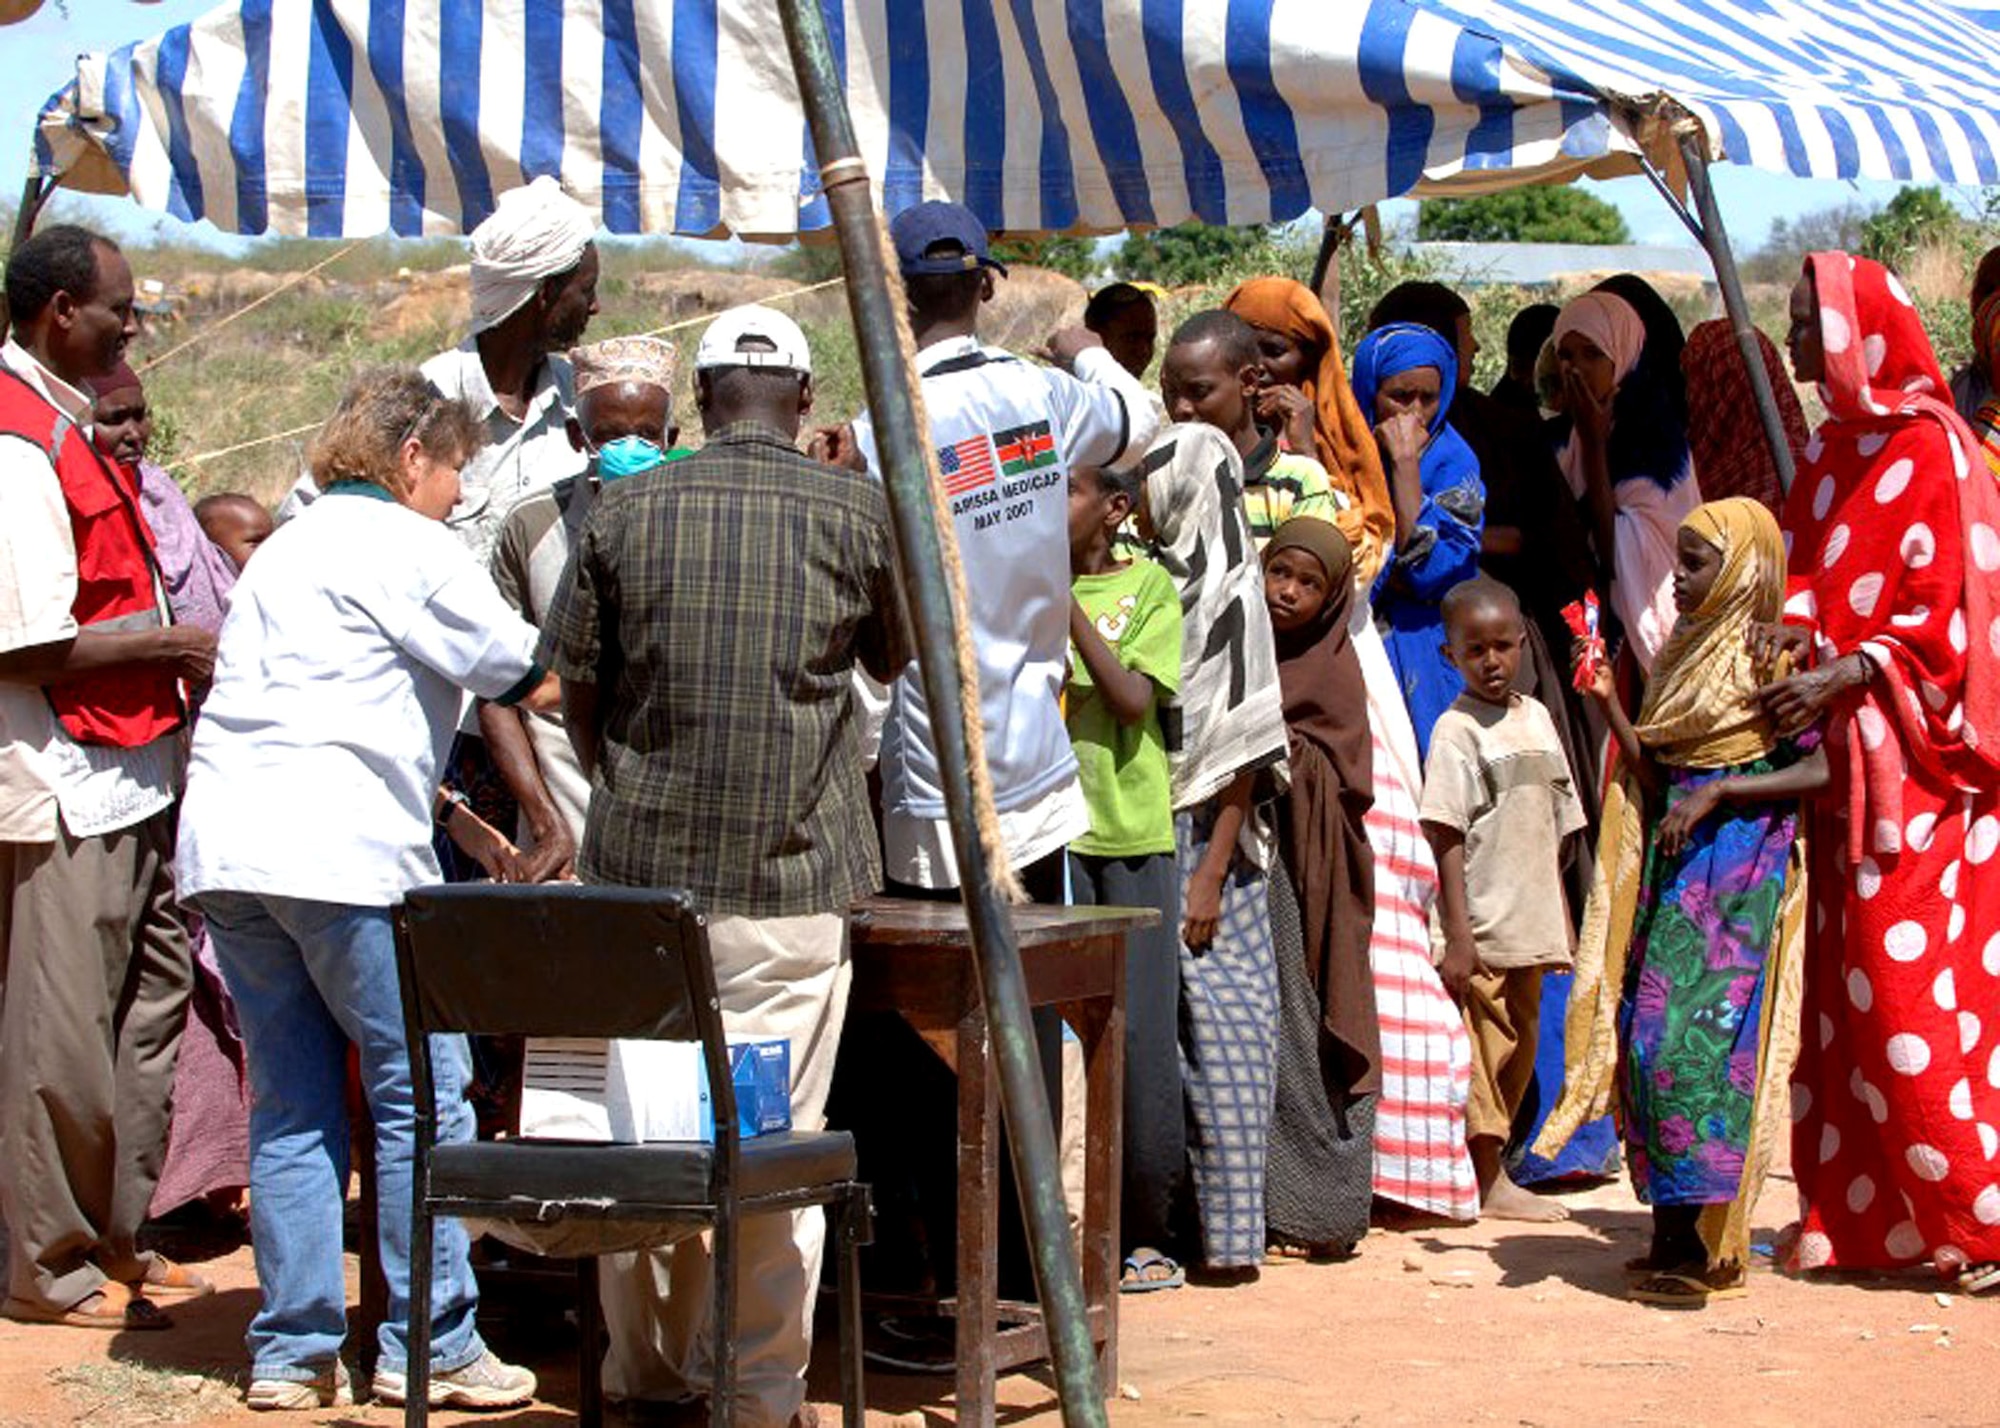 People line up to receive healthcare during a Combined Joint Task Force - Horn of Africa Medical Civic Action Program in May in Kenya. CJTF-HOA servicemembers conducted the MEDCAP in the villages of Shimbir and Balich through a partnership with the Kenyan department of defense, which provided additional medical providers and logistical support. More than 1,000 people received healthcare as part of the project. (U.S. Air Force photo/Tech. Sgt. Carrie Bernard) 
